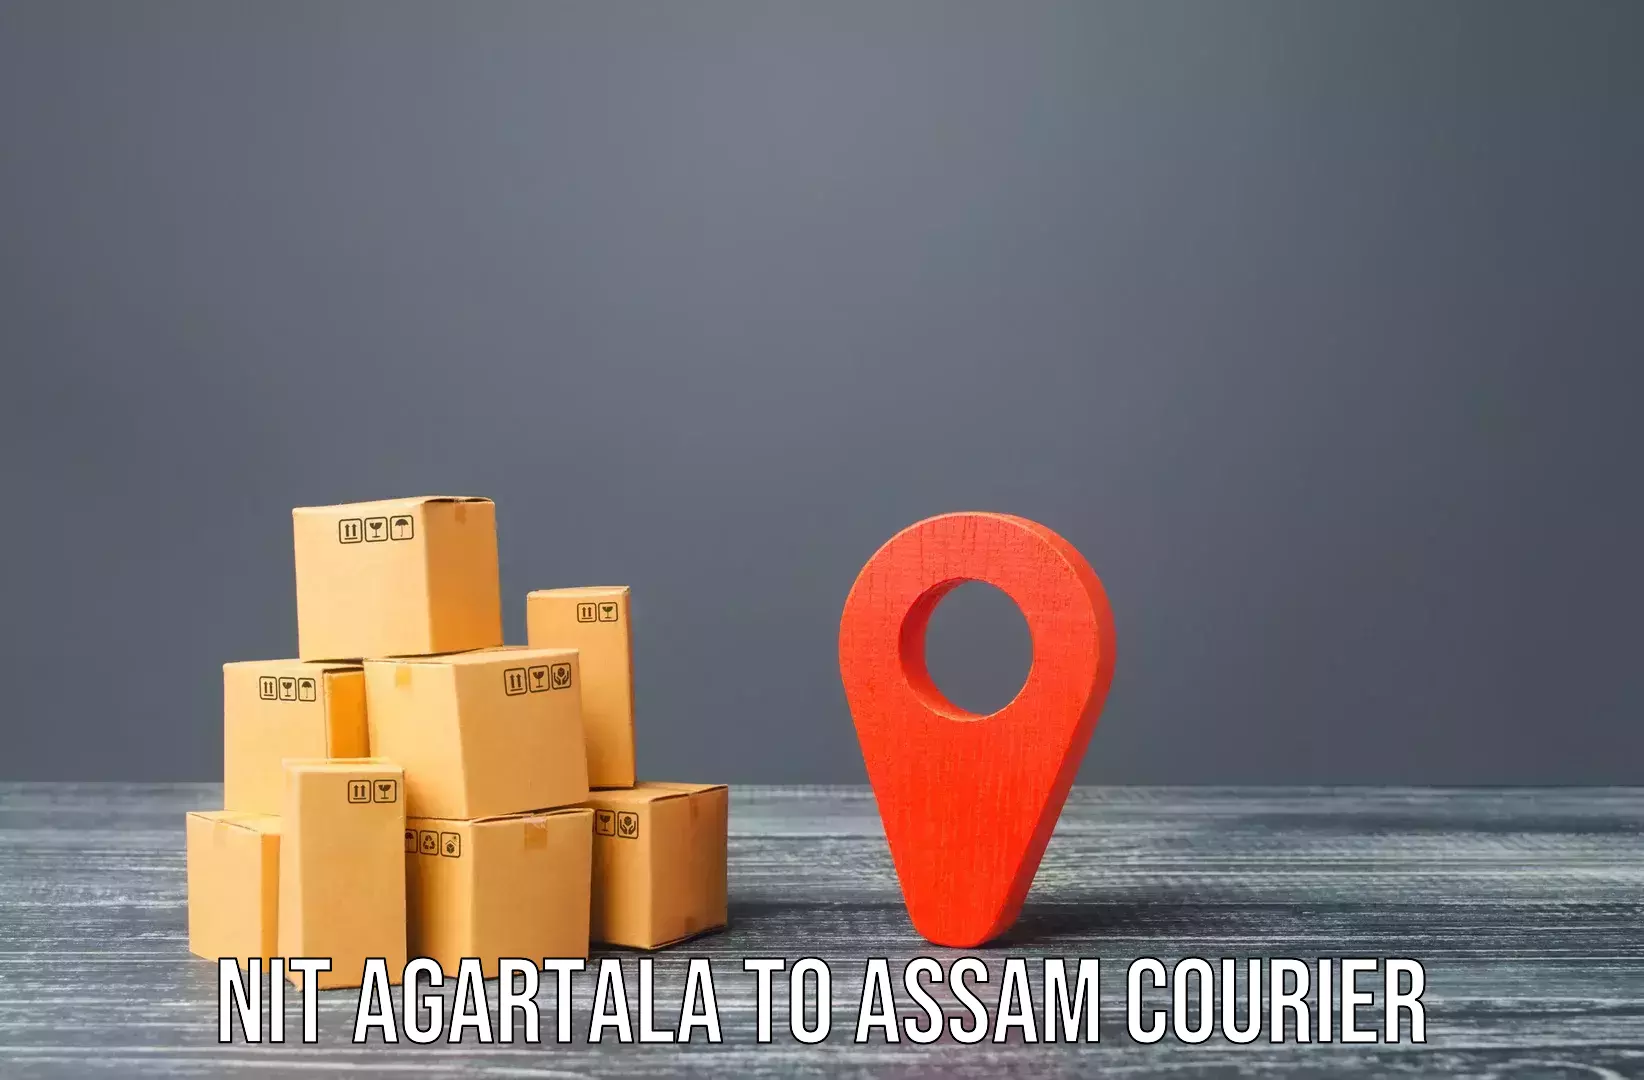 Quality moving services NIT Agartala to Gohpur